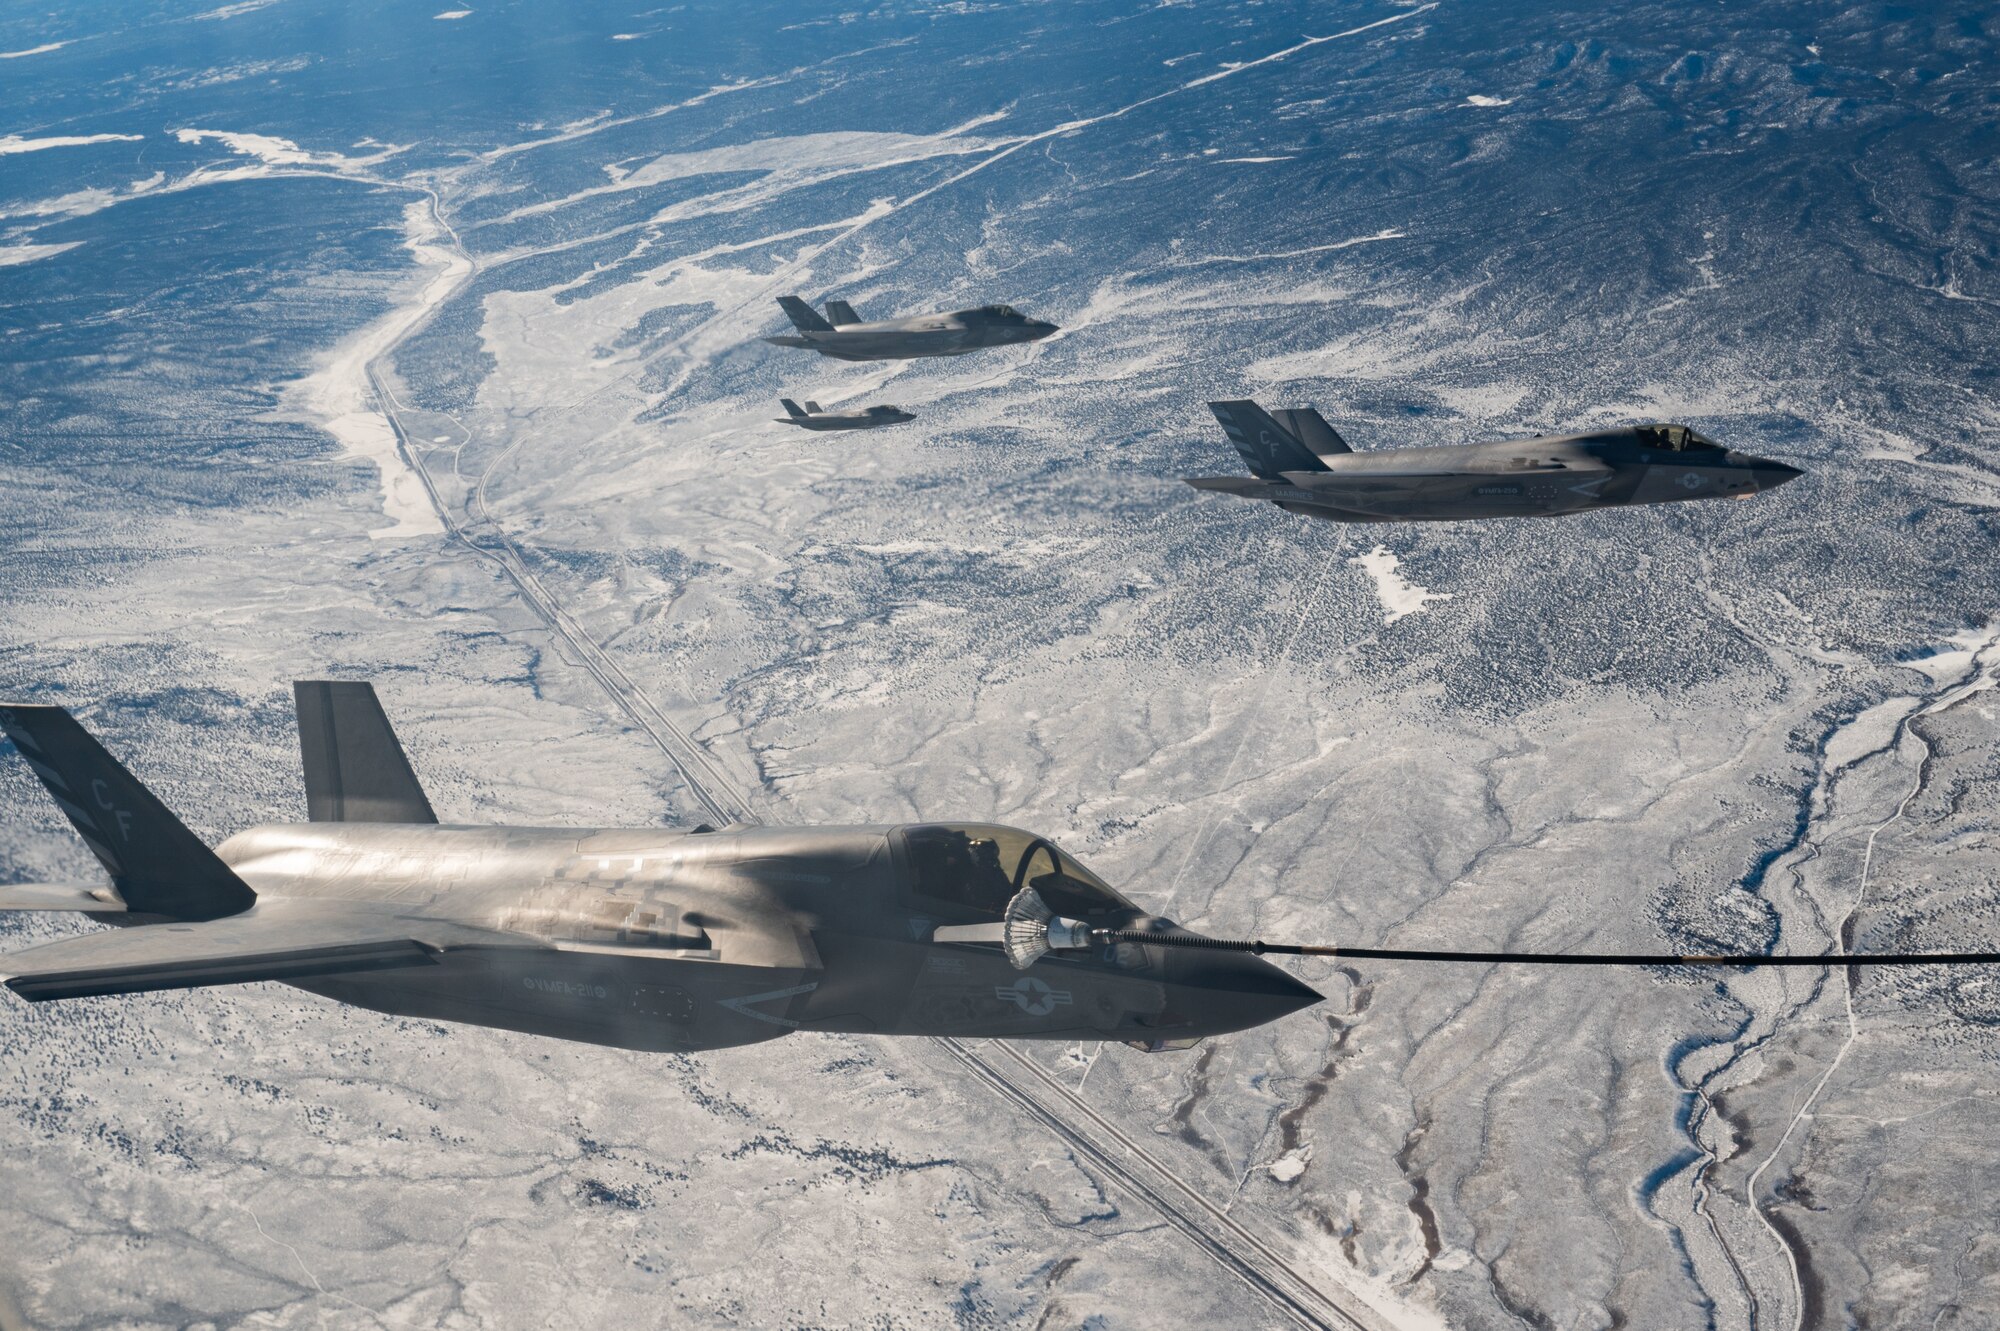 Three U.S. Marine Corps F-35Bs from Marine Fighter Attack Squadron-211 await refueling from a Royal Air Force Voyager in participation of Red Flag-Nellis 23-1 over the Nevada Test and Training Range, Jan. 26, 2023.